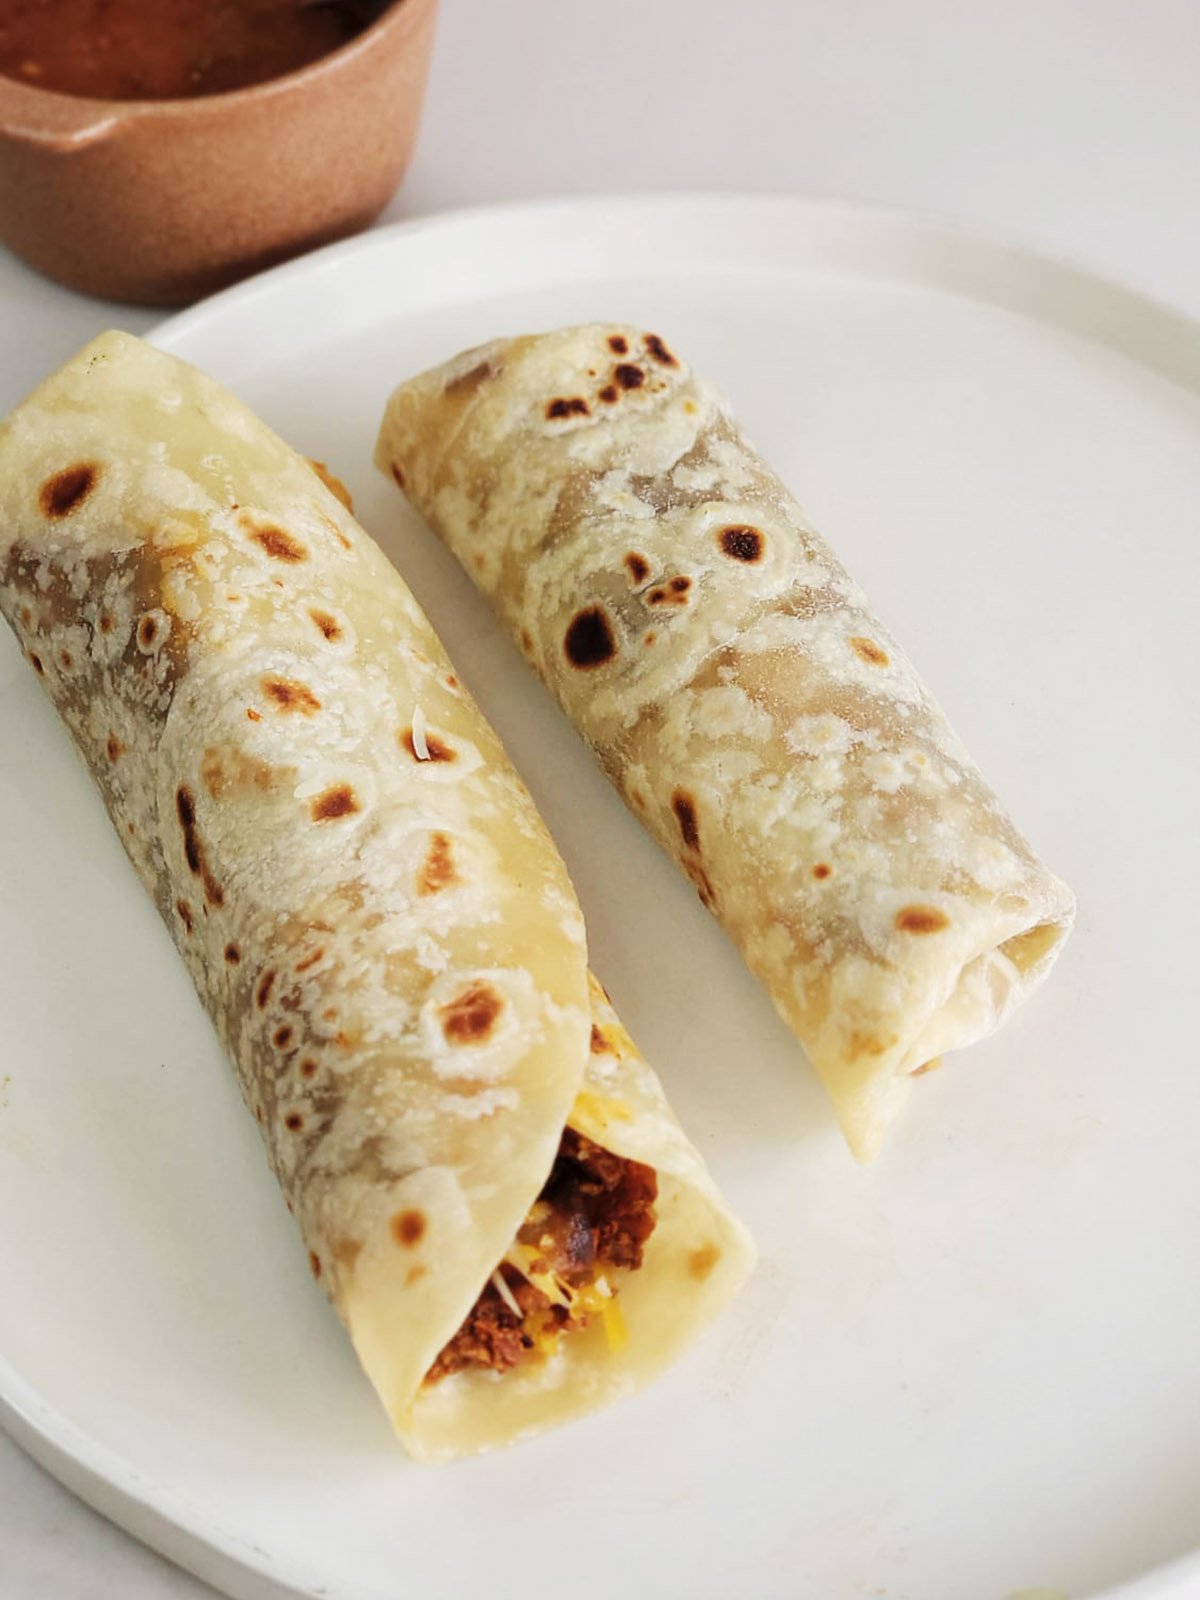 Two burritos side by side.